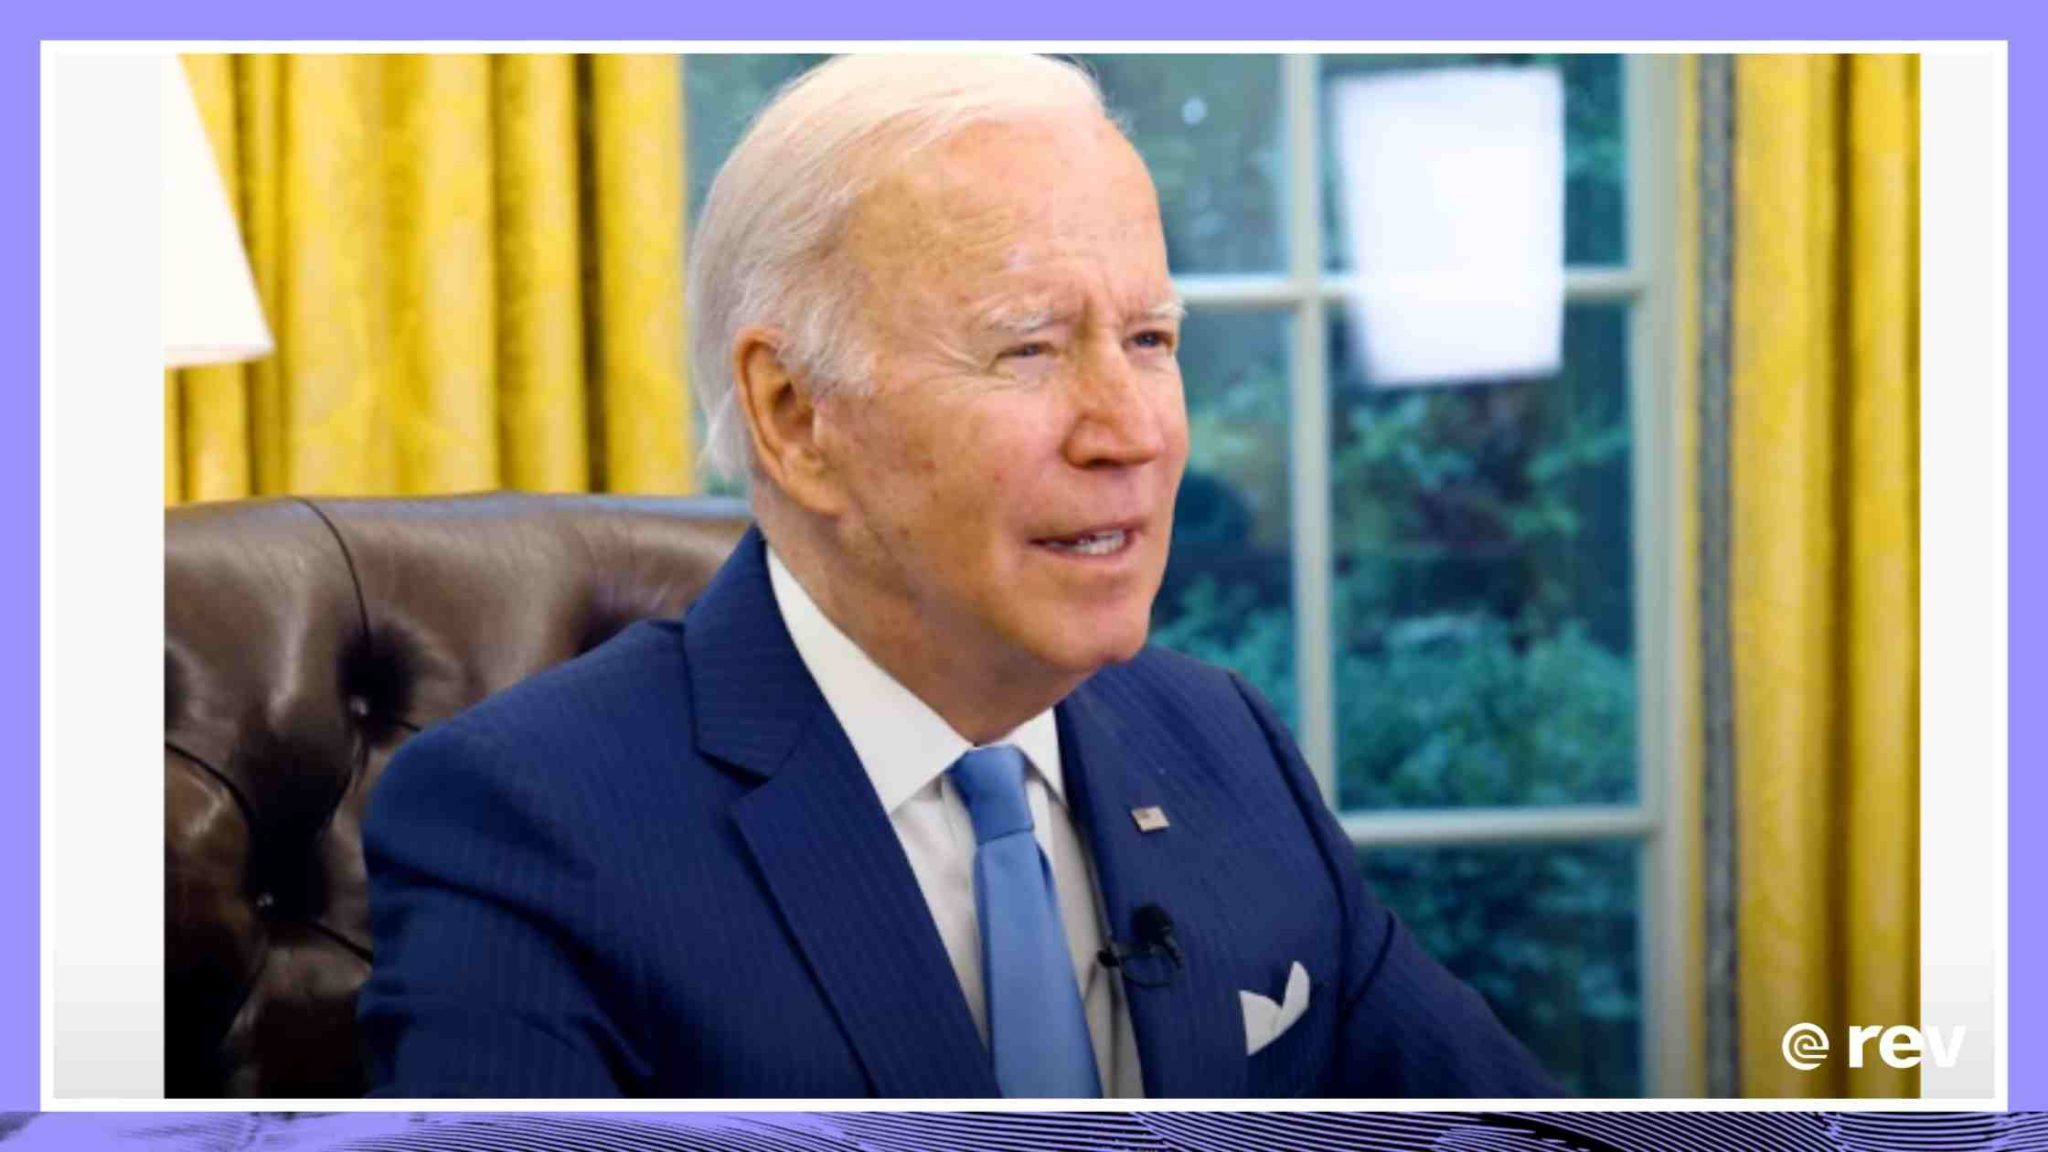 President Biden Announces Additional Actions to Increase Infant Formula Supply 5/18/22 Transcript